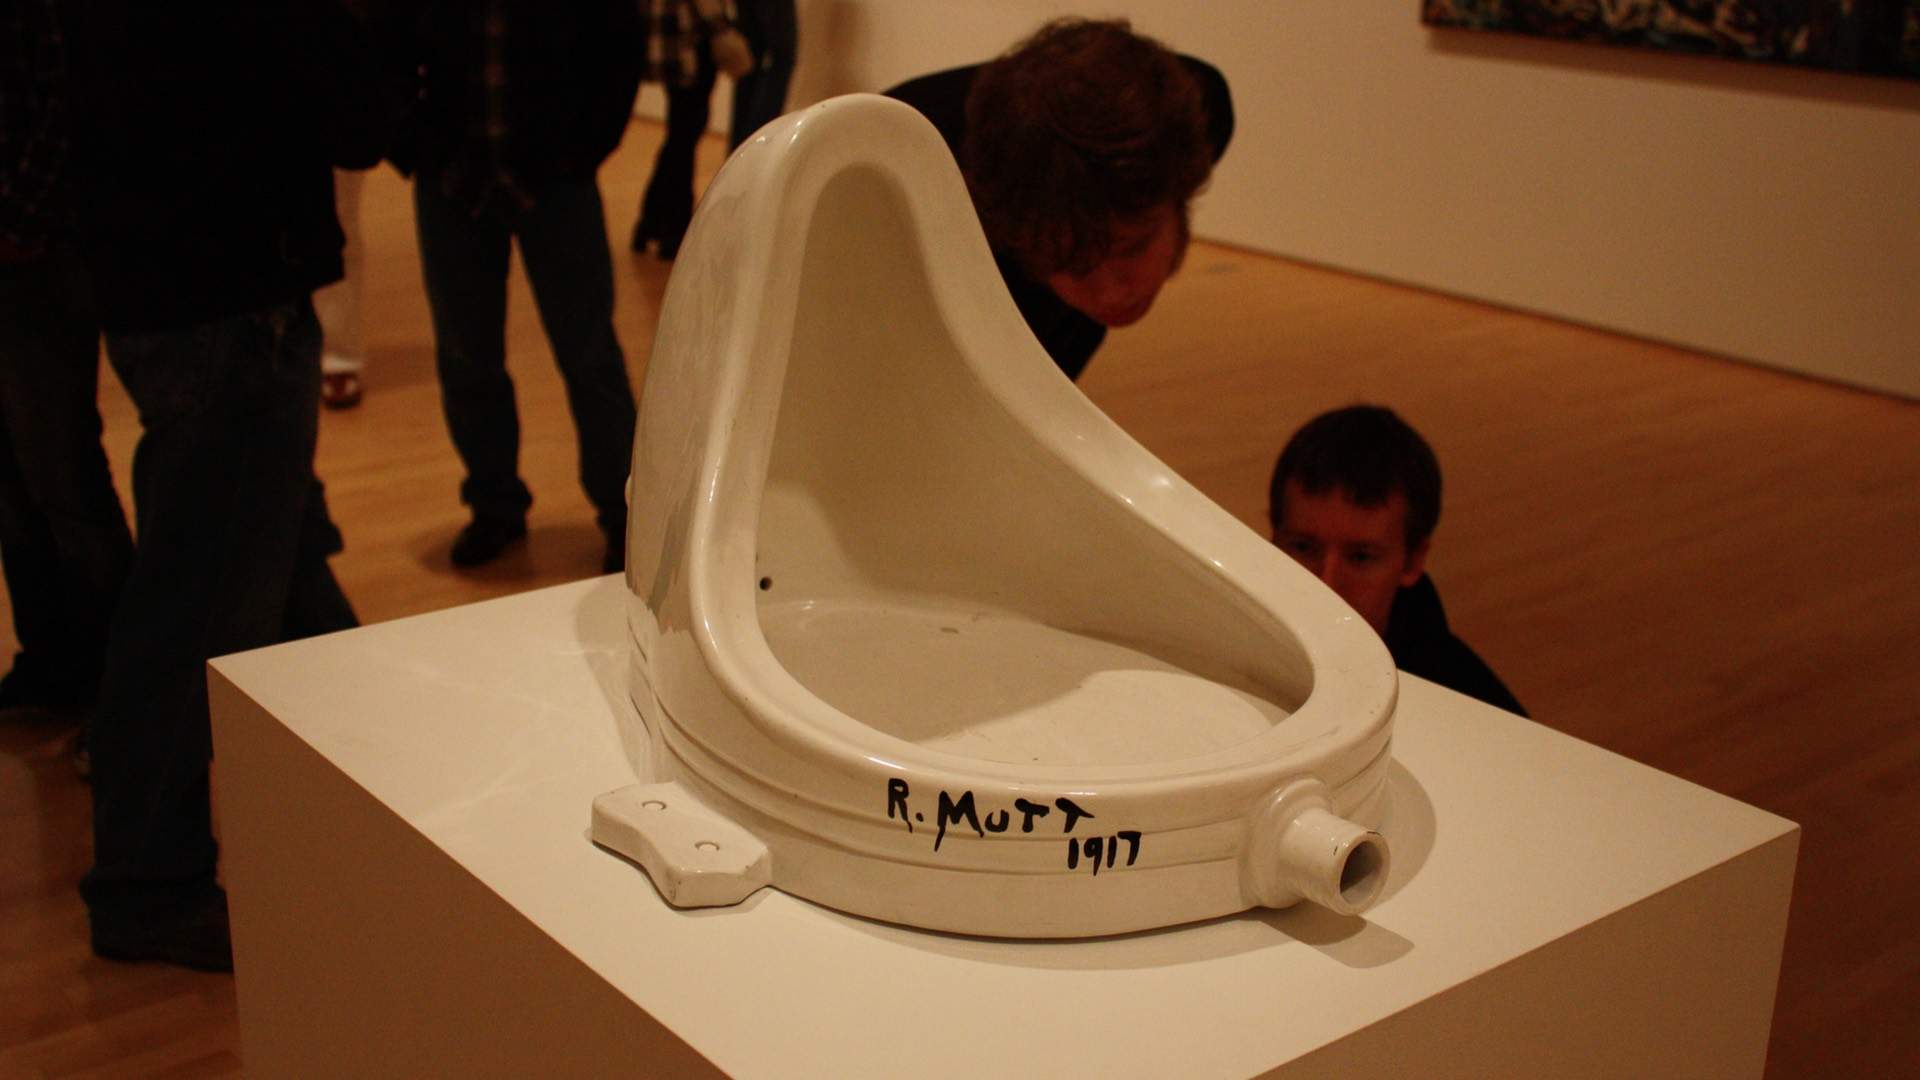 A Huge Marcel Duchamp Exhibition Is Coming to Australia